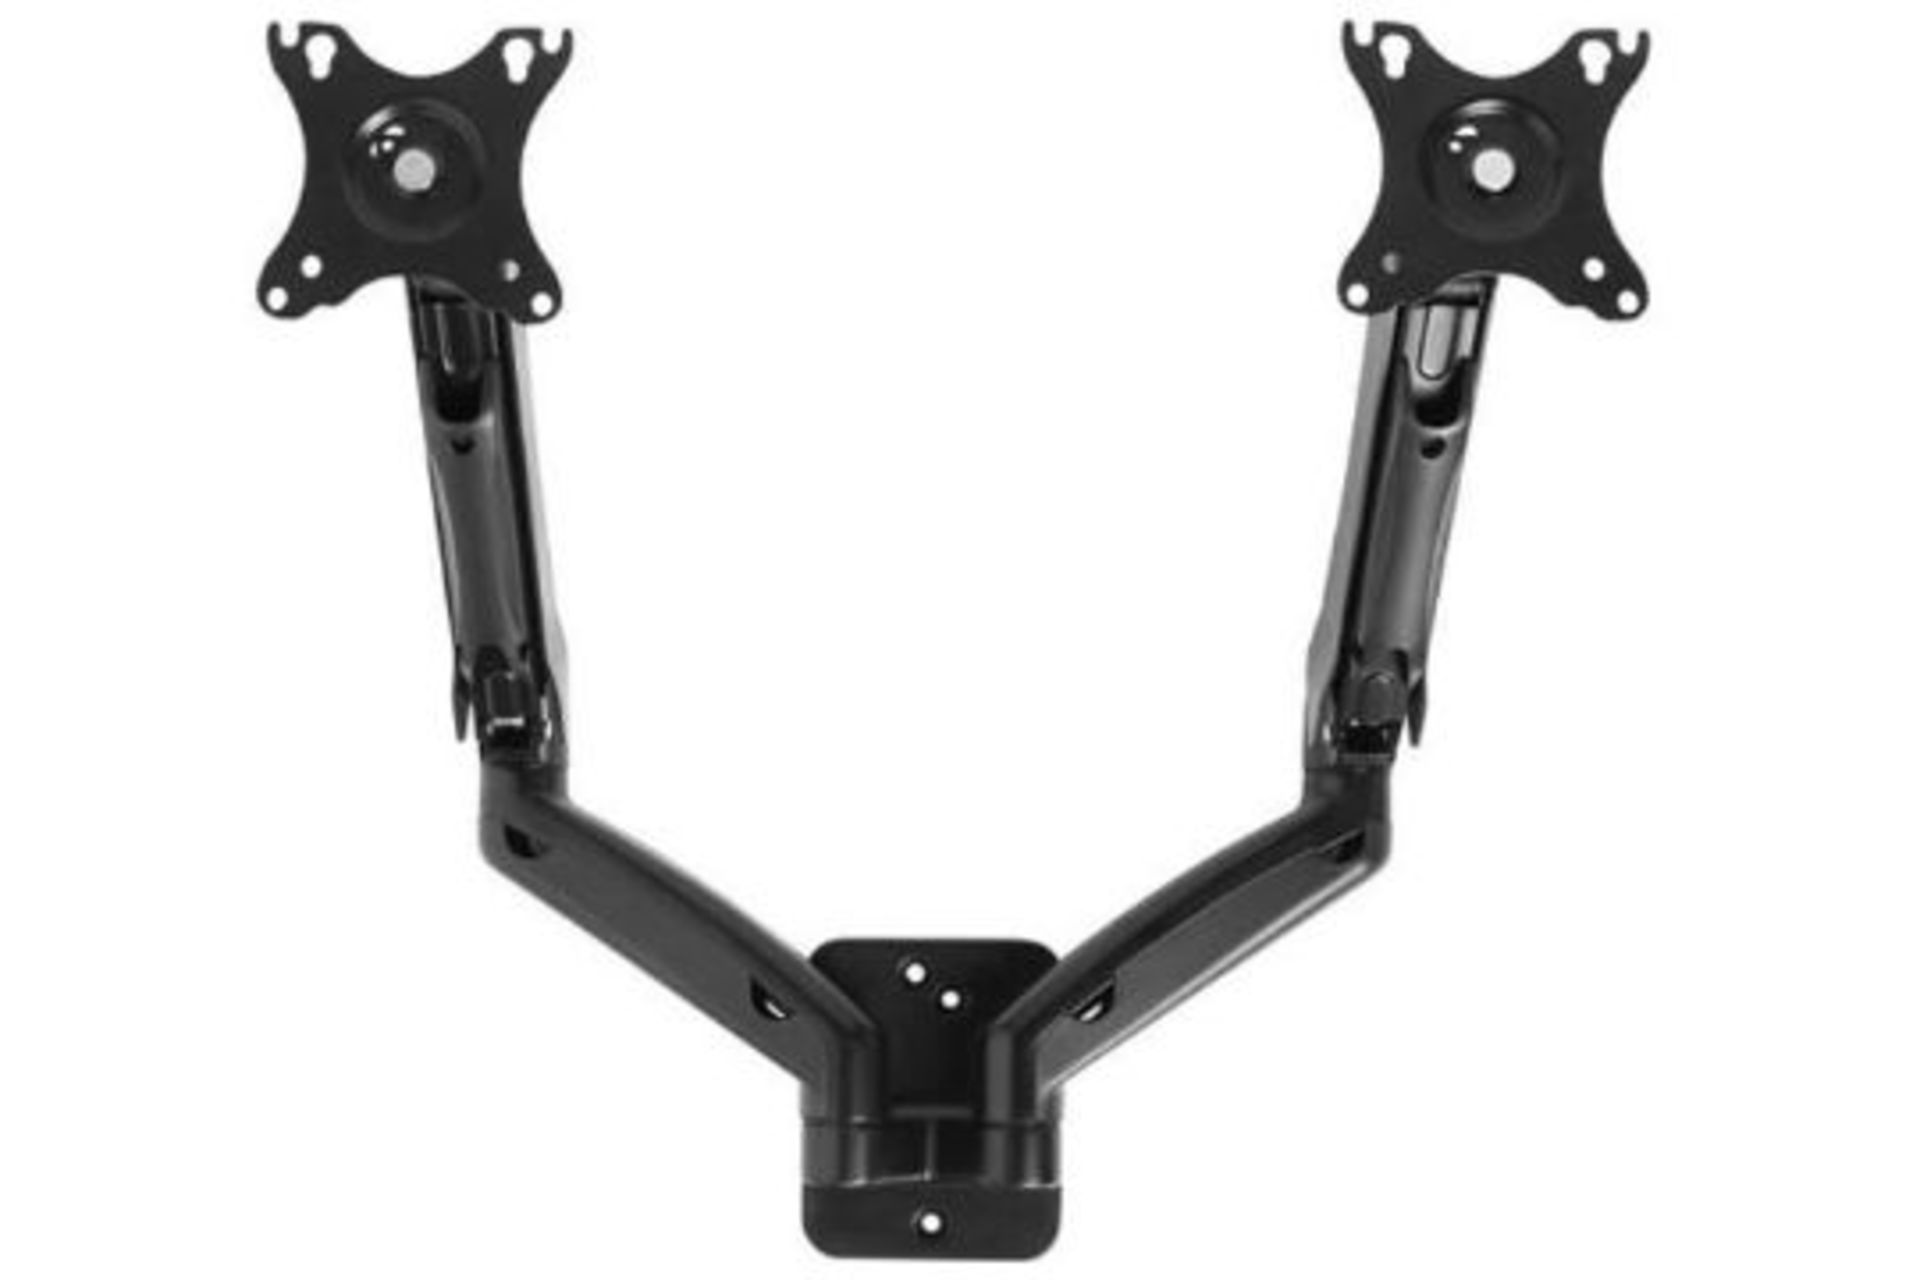 Luxury Wall Bracket For Two Monitors (ER51) The Luxury wall bracket provides you with greater